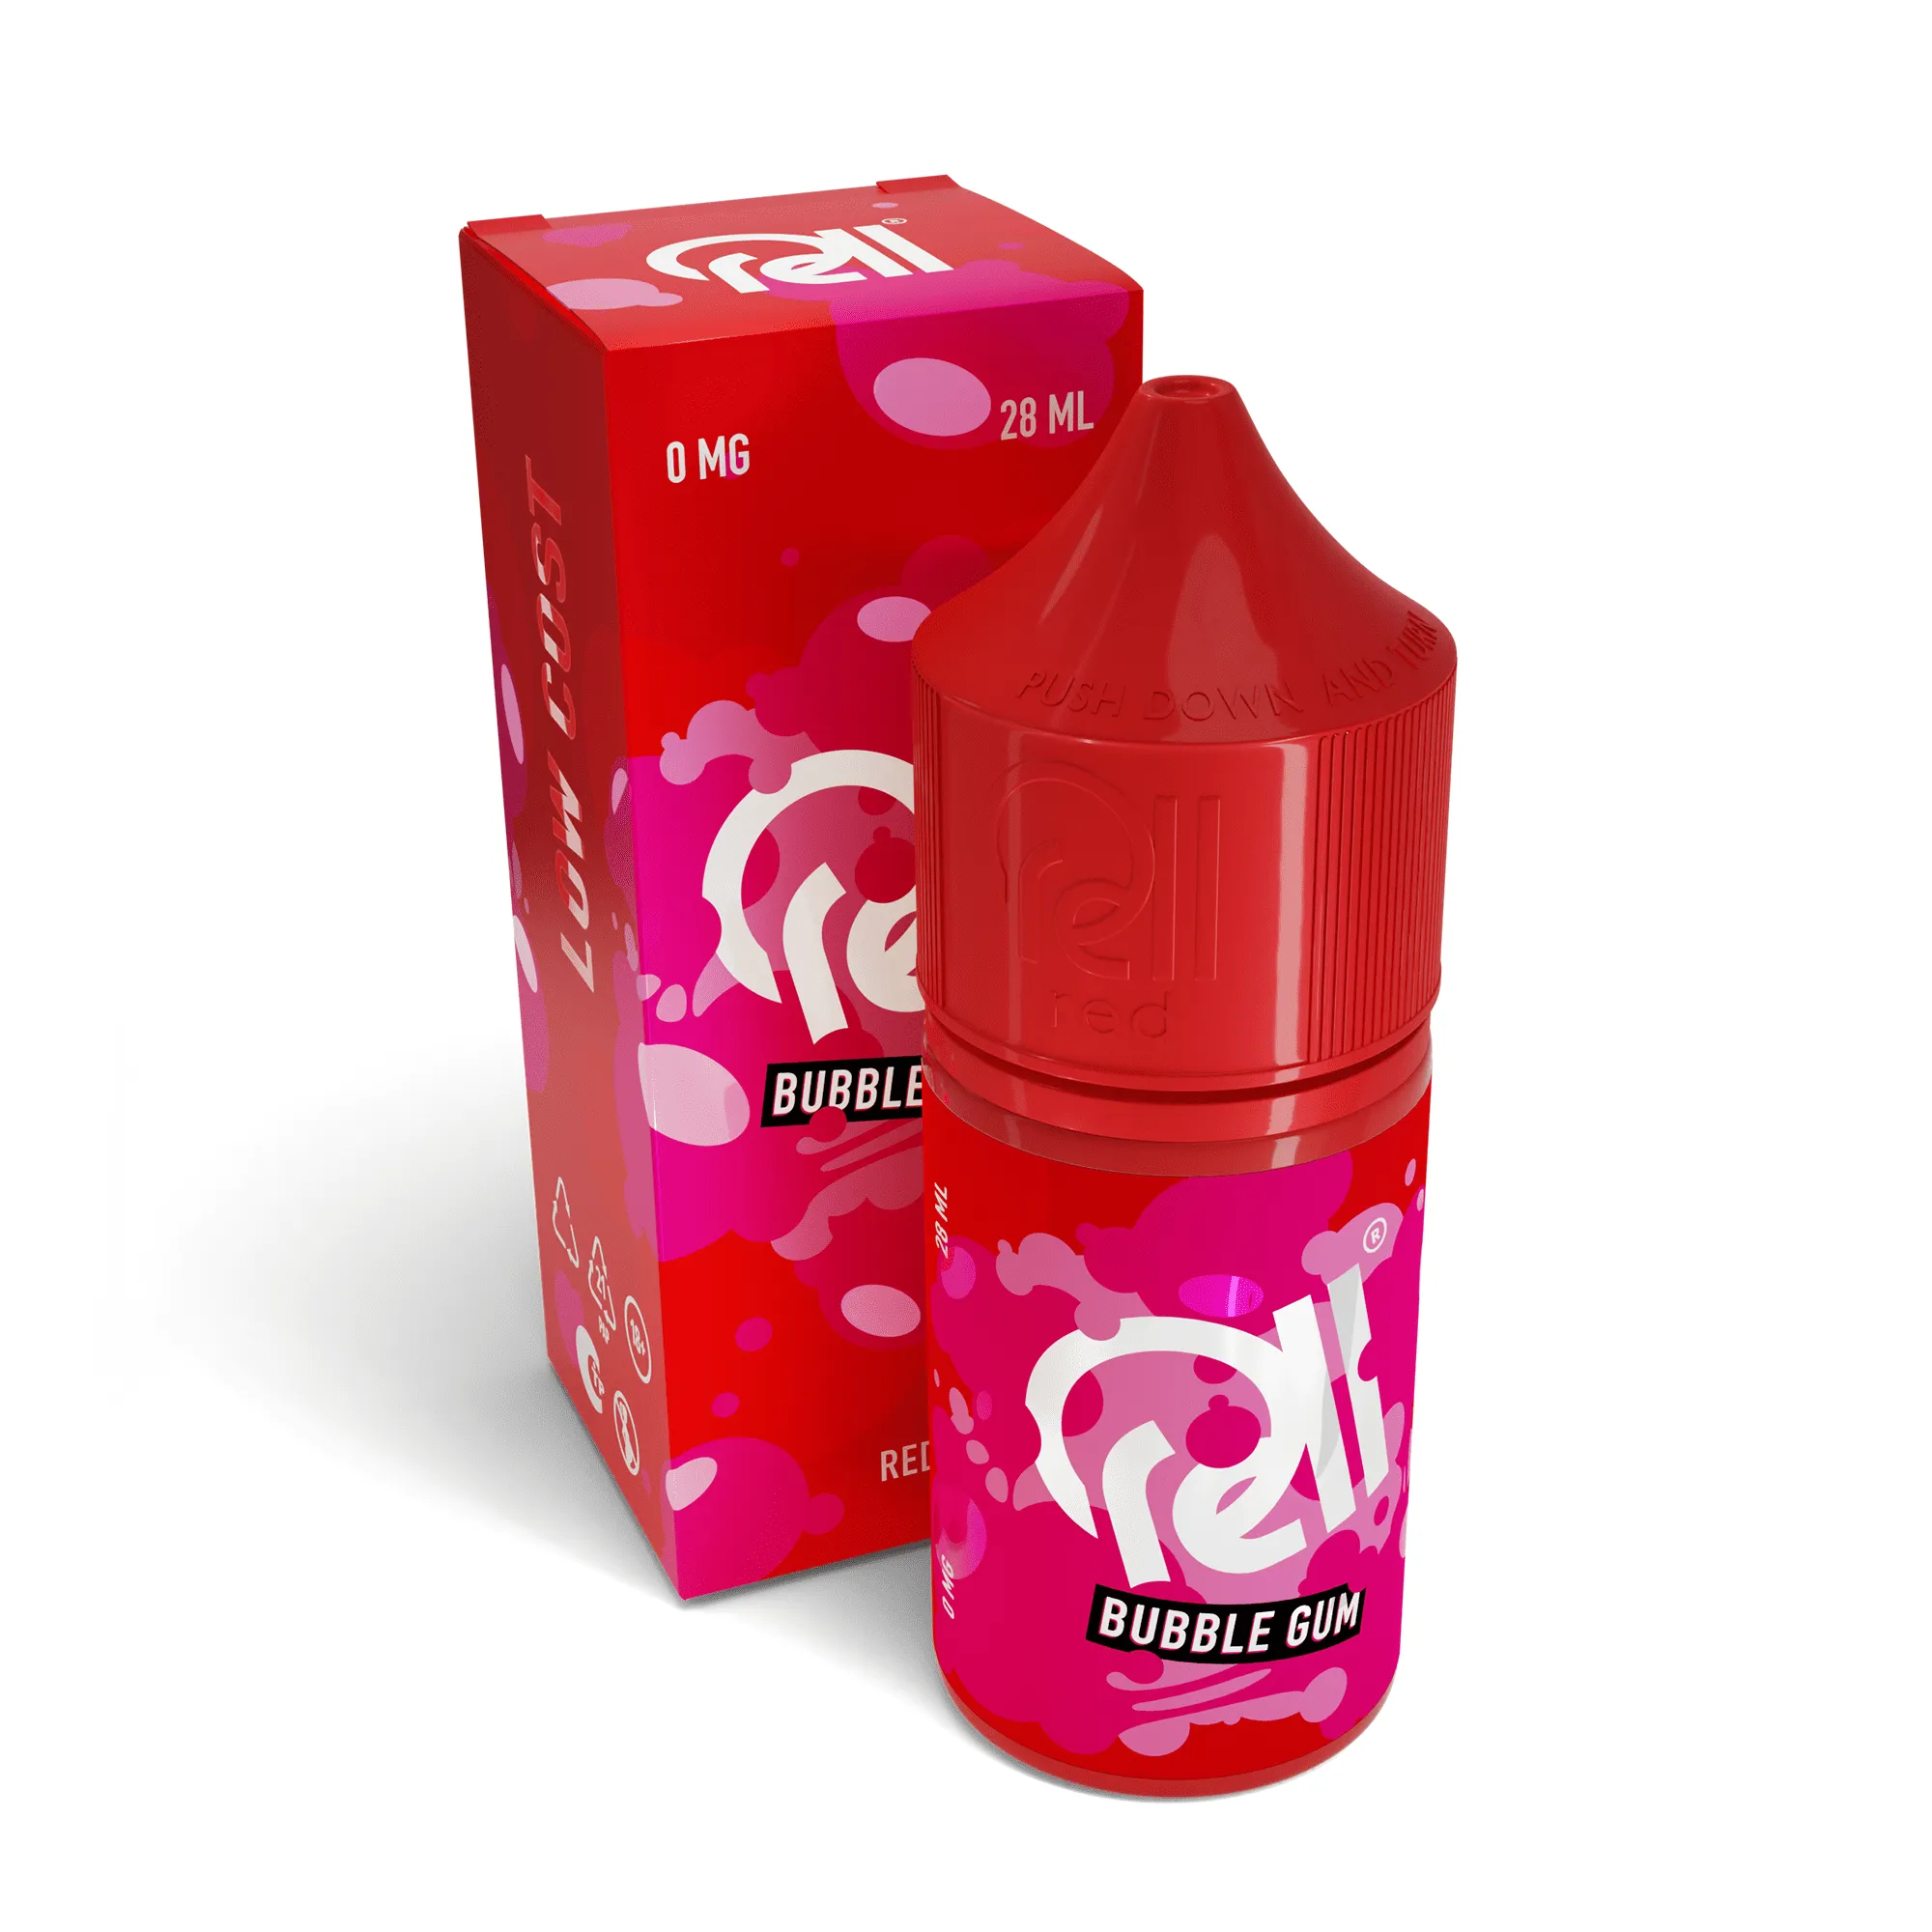 Rell red. Rell Red жидкость. Rell Low cost жижа. Жидкость Rell Red Salt 30мл. Жидкости Rell Low cost вкусы.